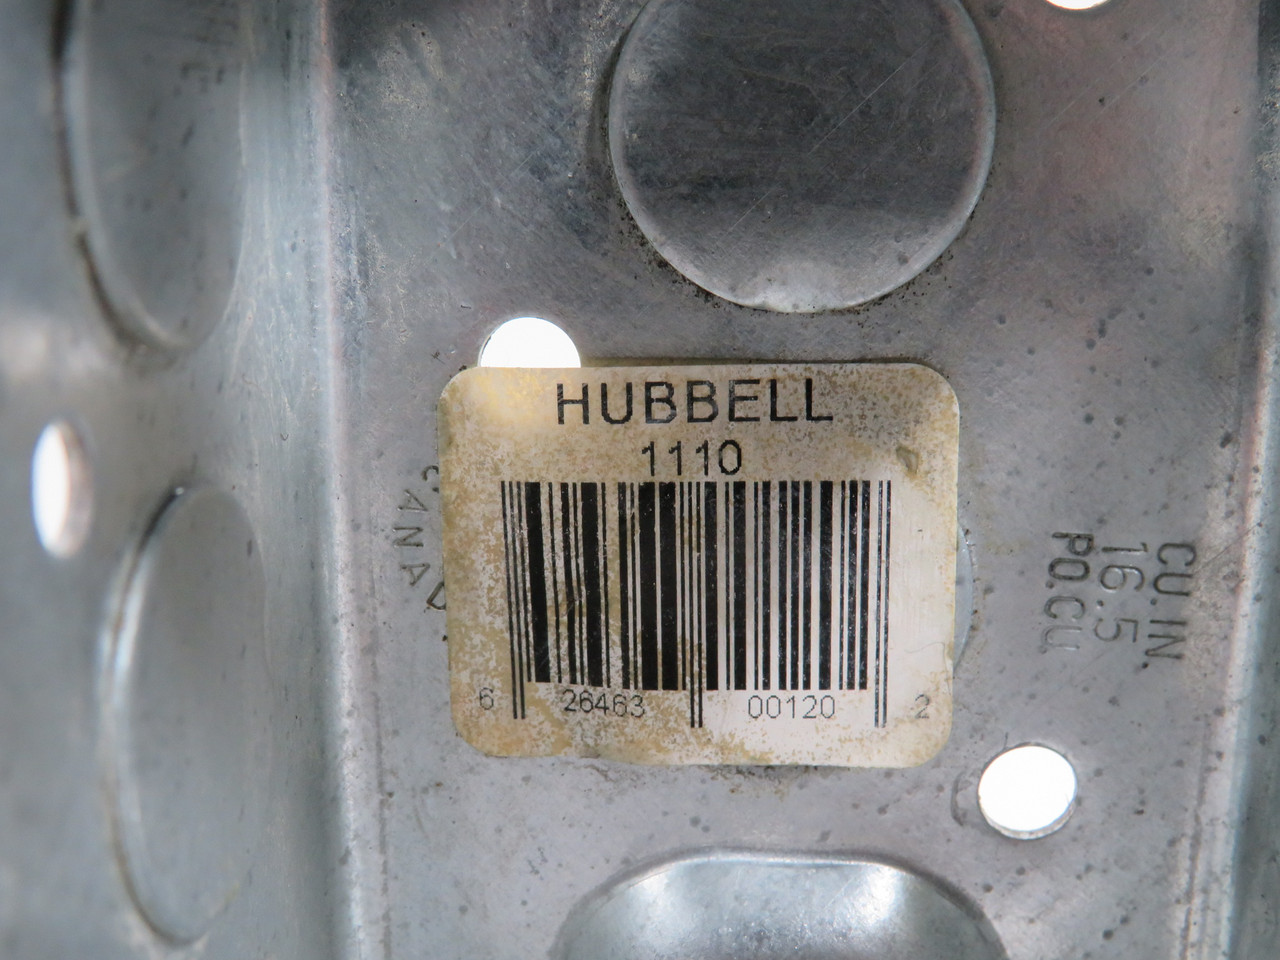 Hubbell 1110 Utility Box 1-7/8" Deep w/ Ground Screw USED